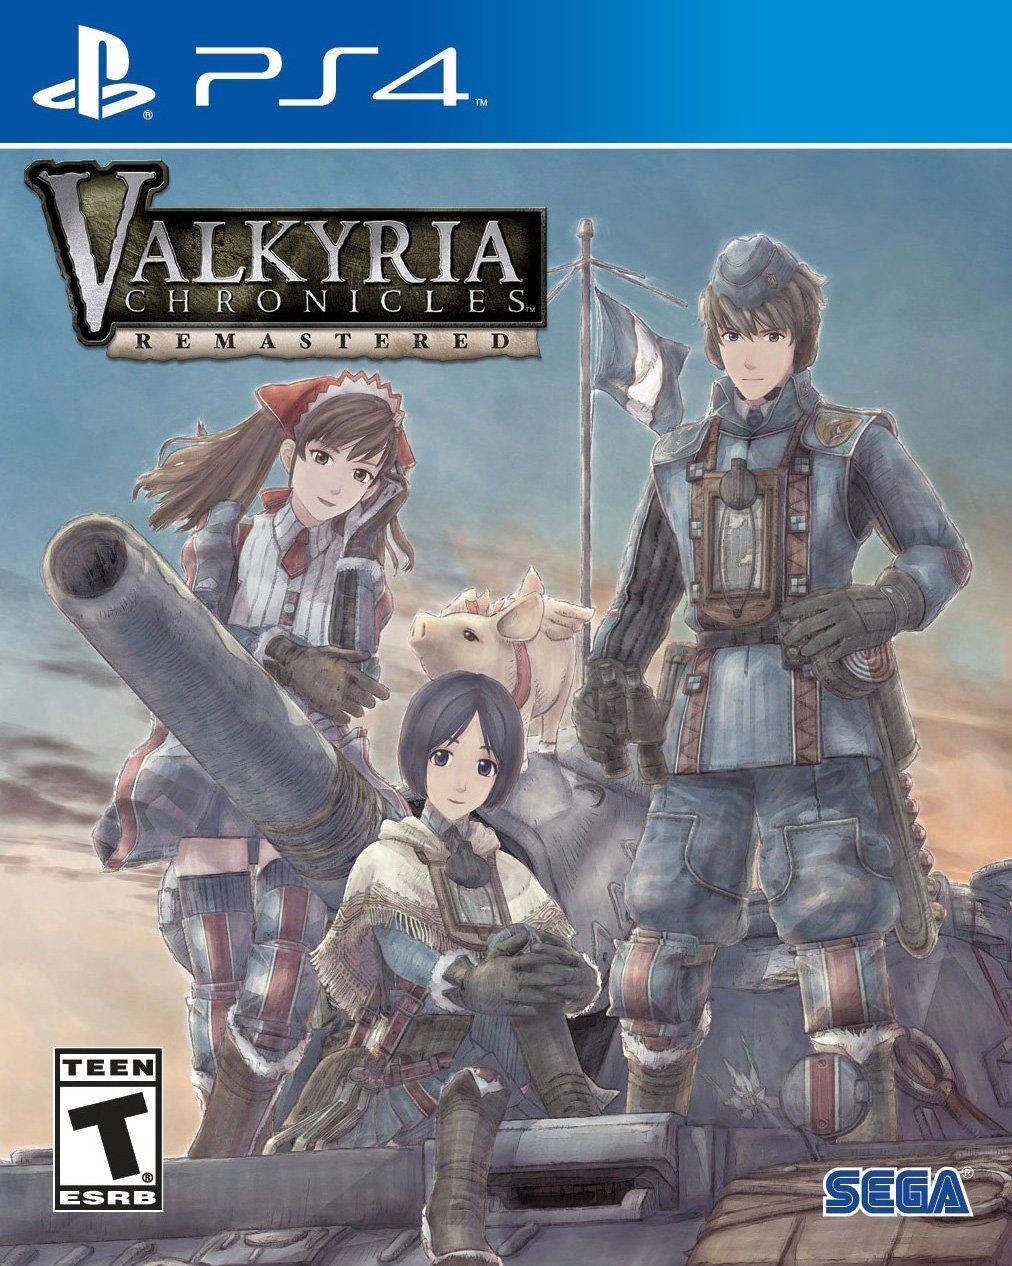 Valkyria Chronicles Ps4 Poster Wallpaper